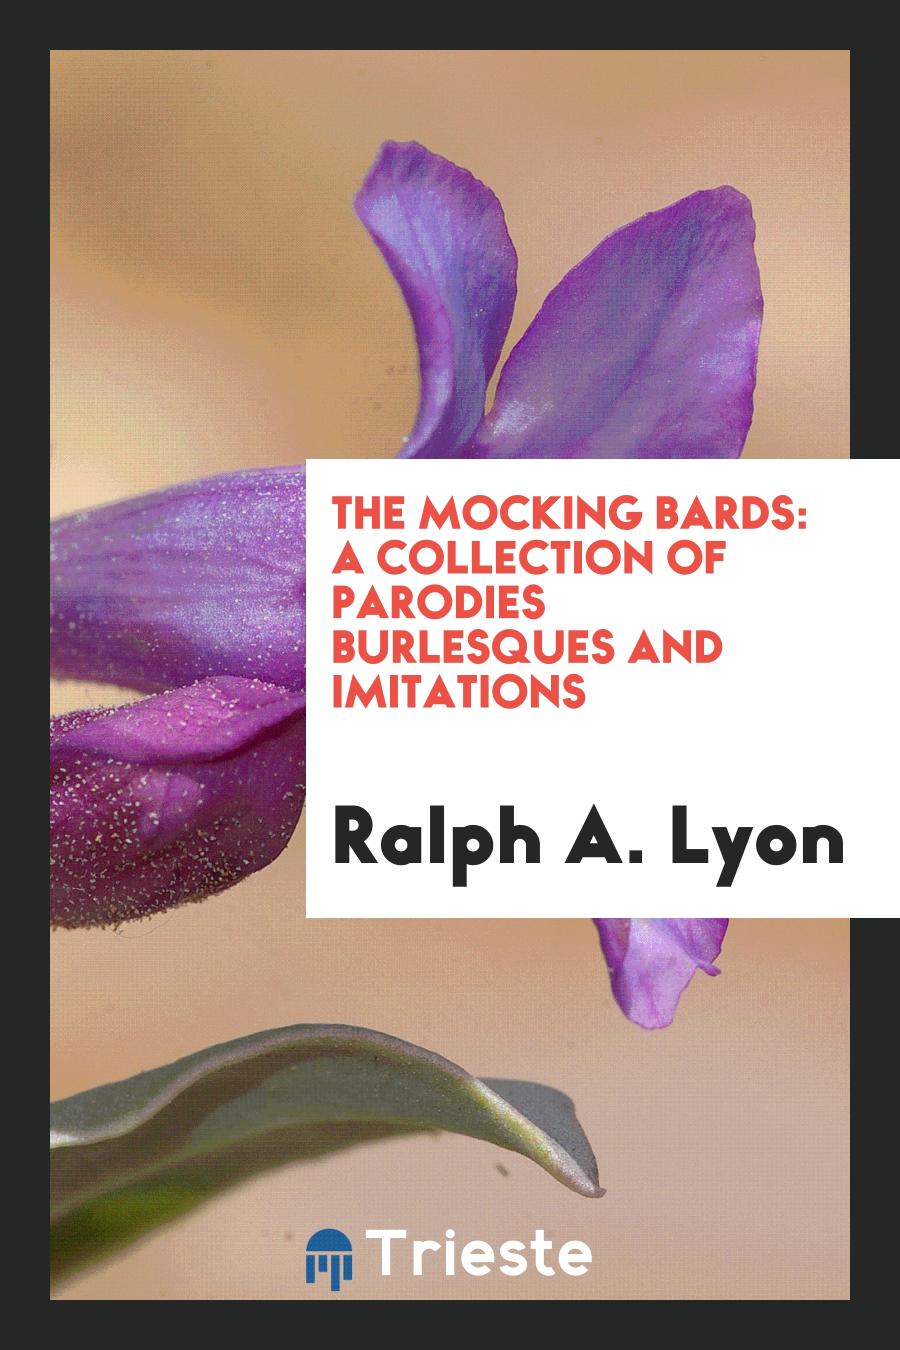 The Mocking Bards: A Collection of Parodies Burlesques and Imitations